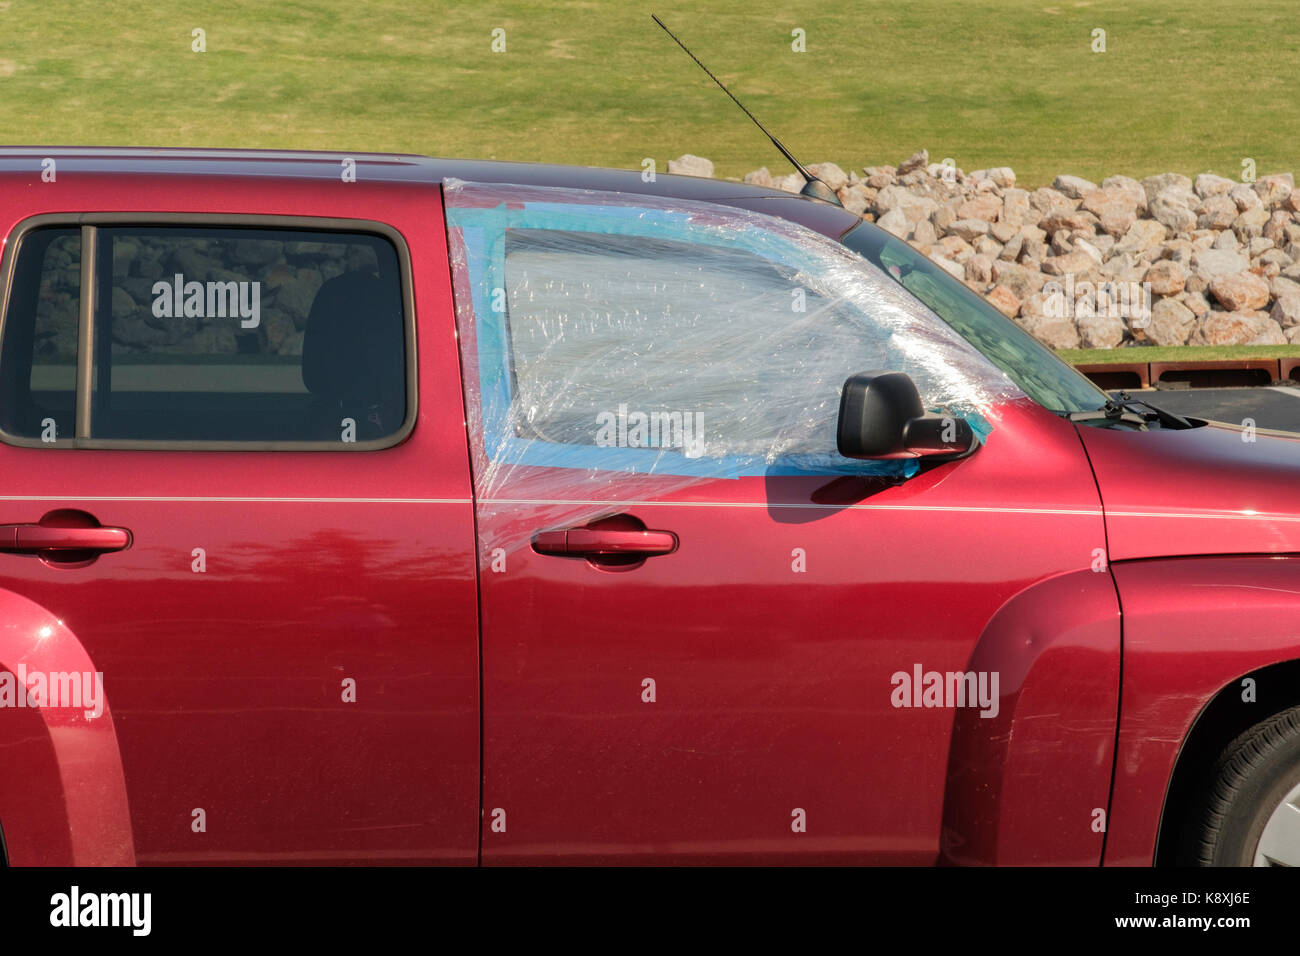 A red automobile with a broken passenger window, taped up with plastic. Oklahoma City, Oklahoma, USA. Concepts. Vandalism. Stock Photo